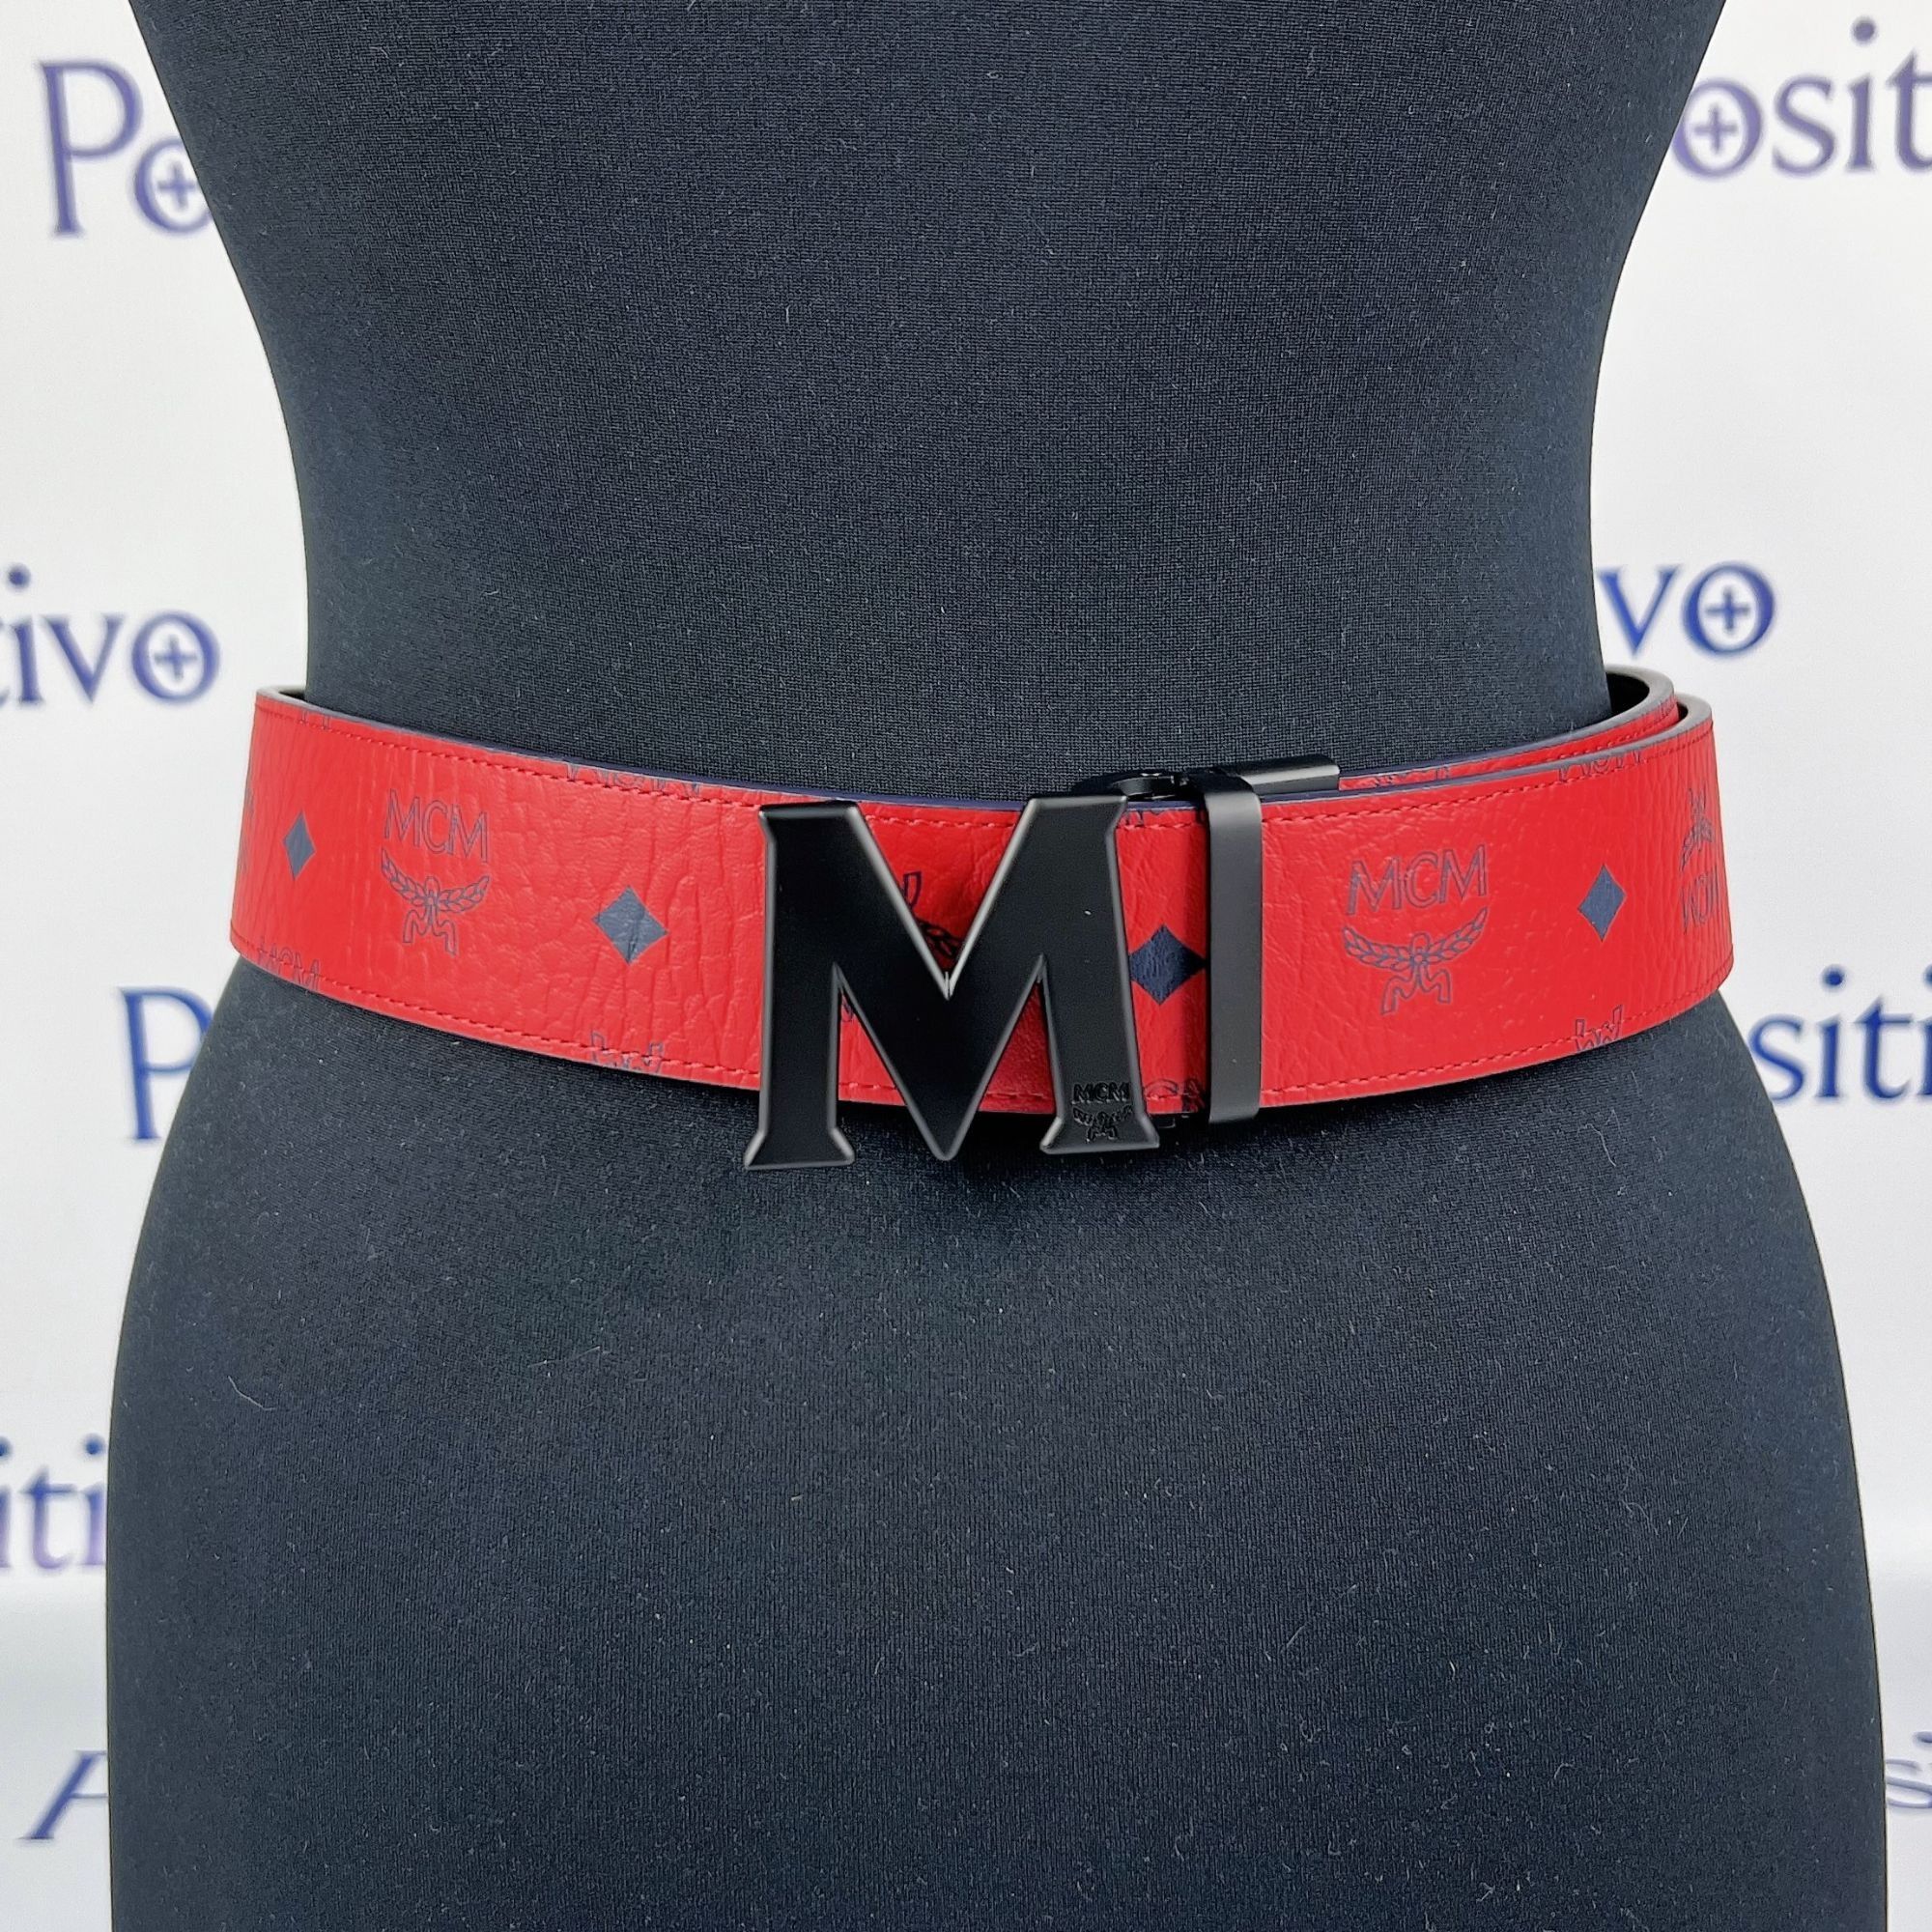 mcm reversable belt red and black With Forced Holes !